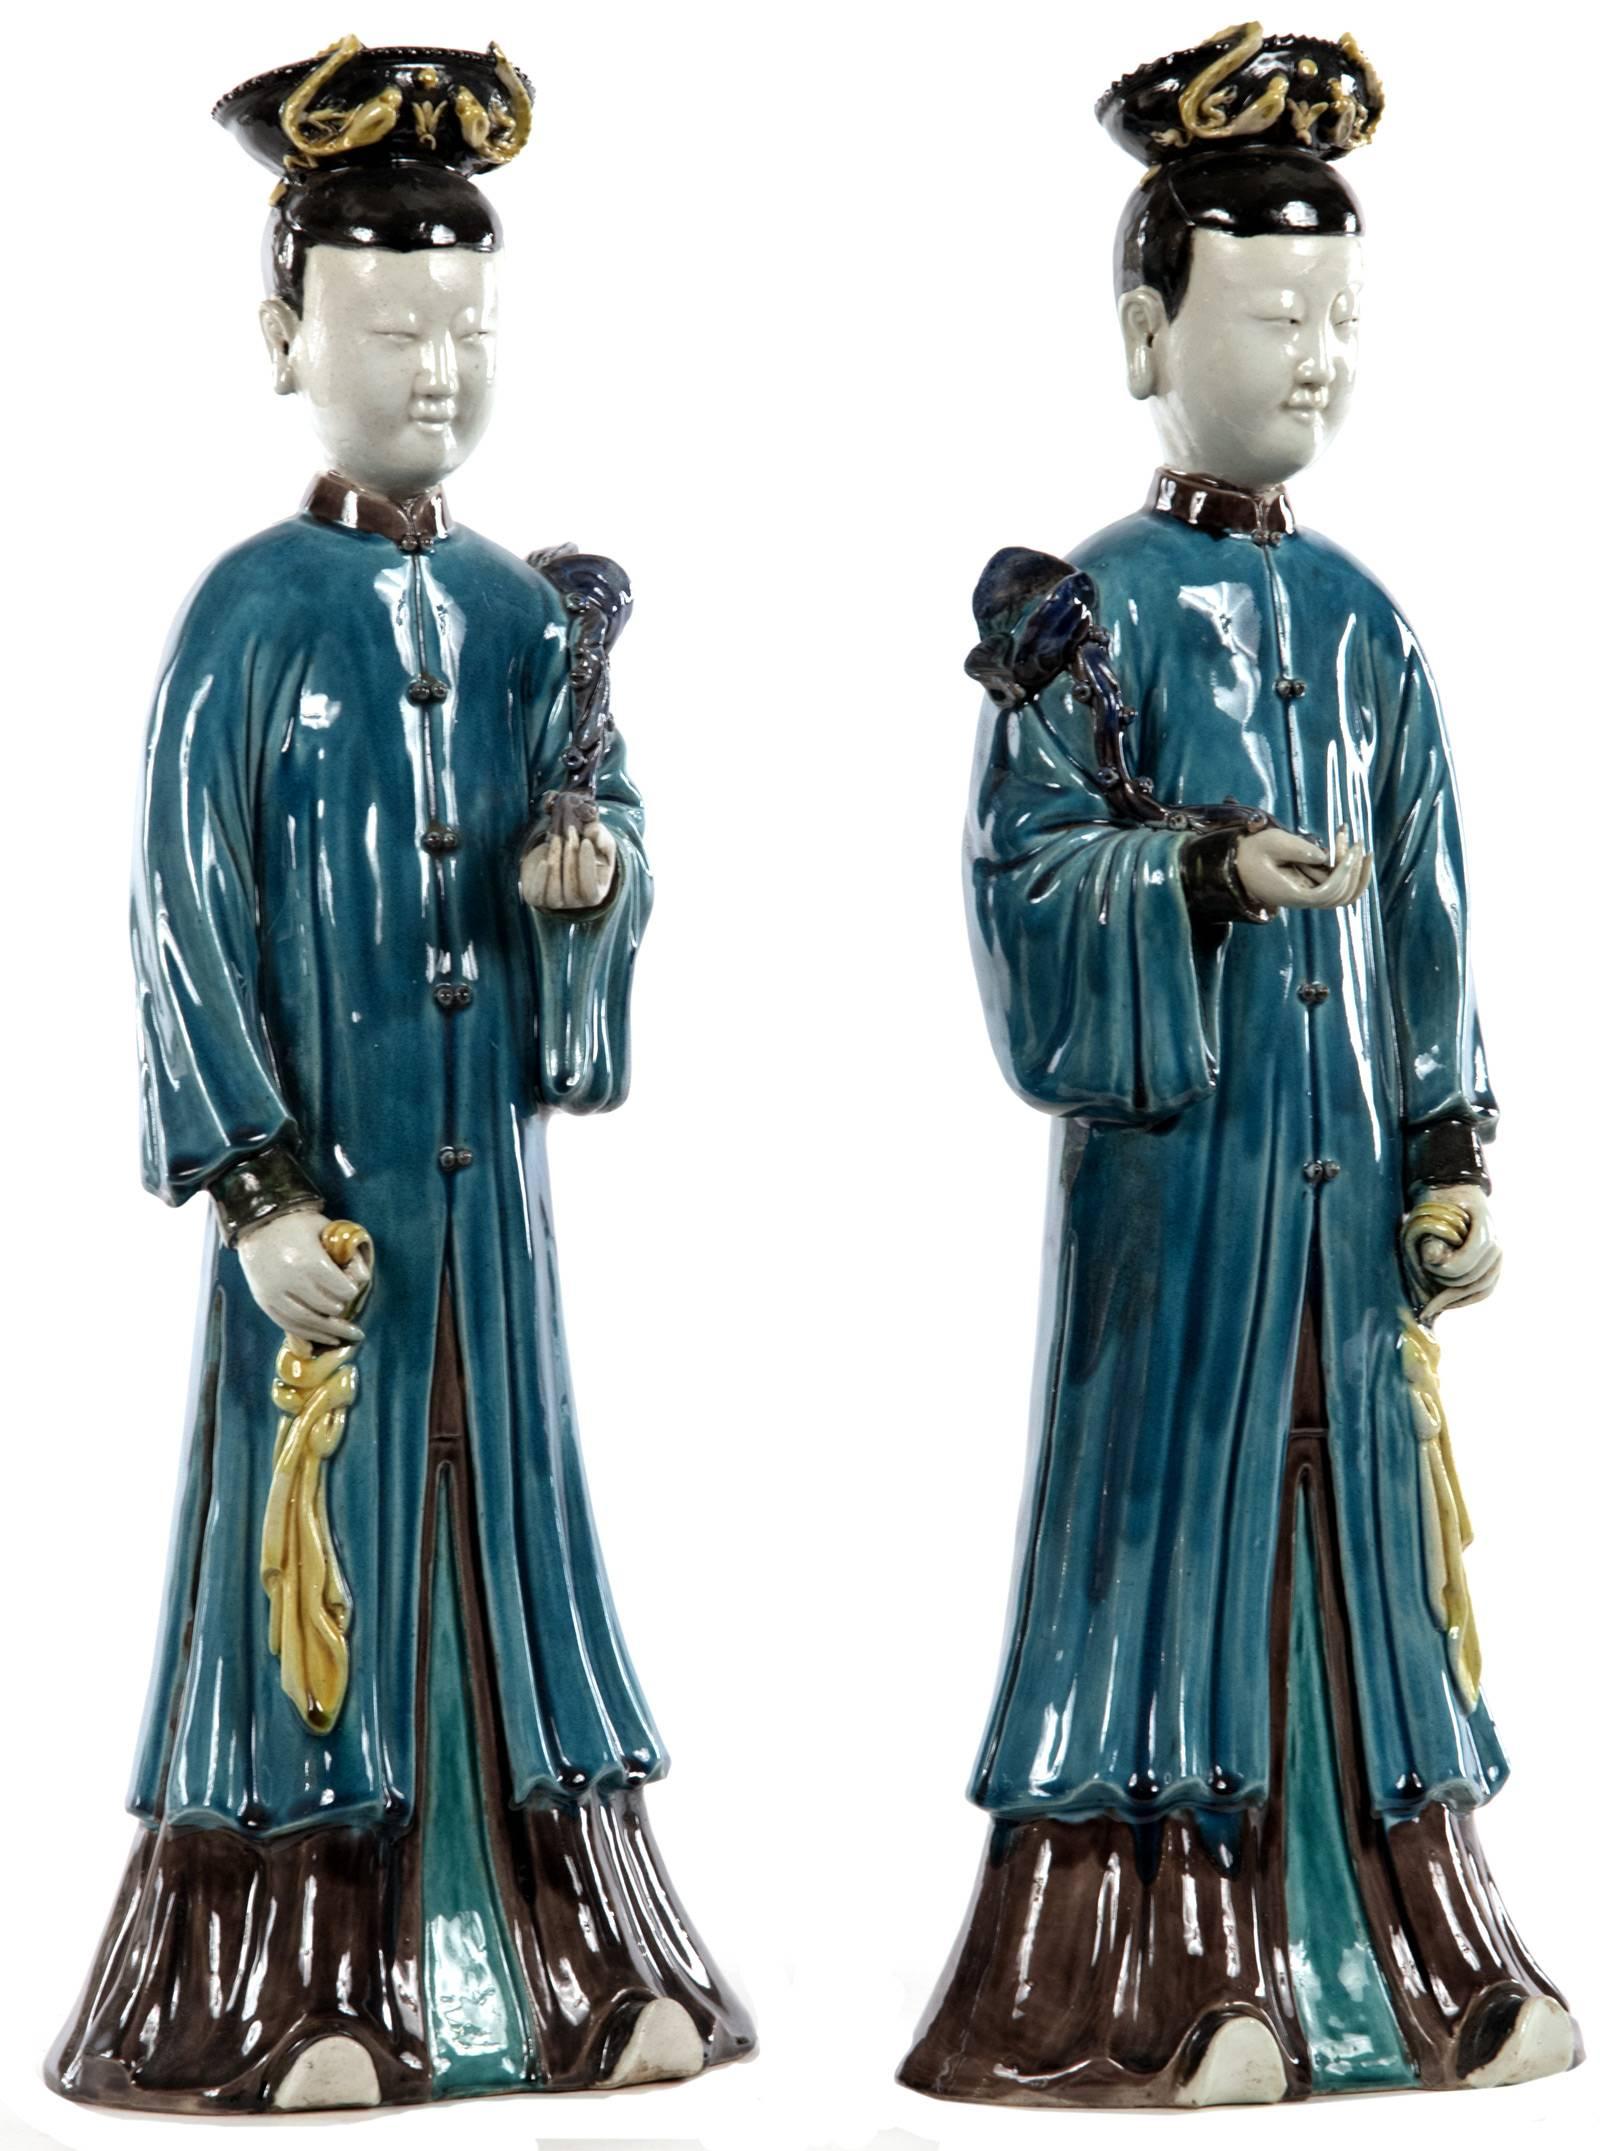 A pair of glazed Chinese figurines representing 